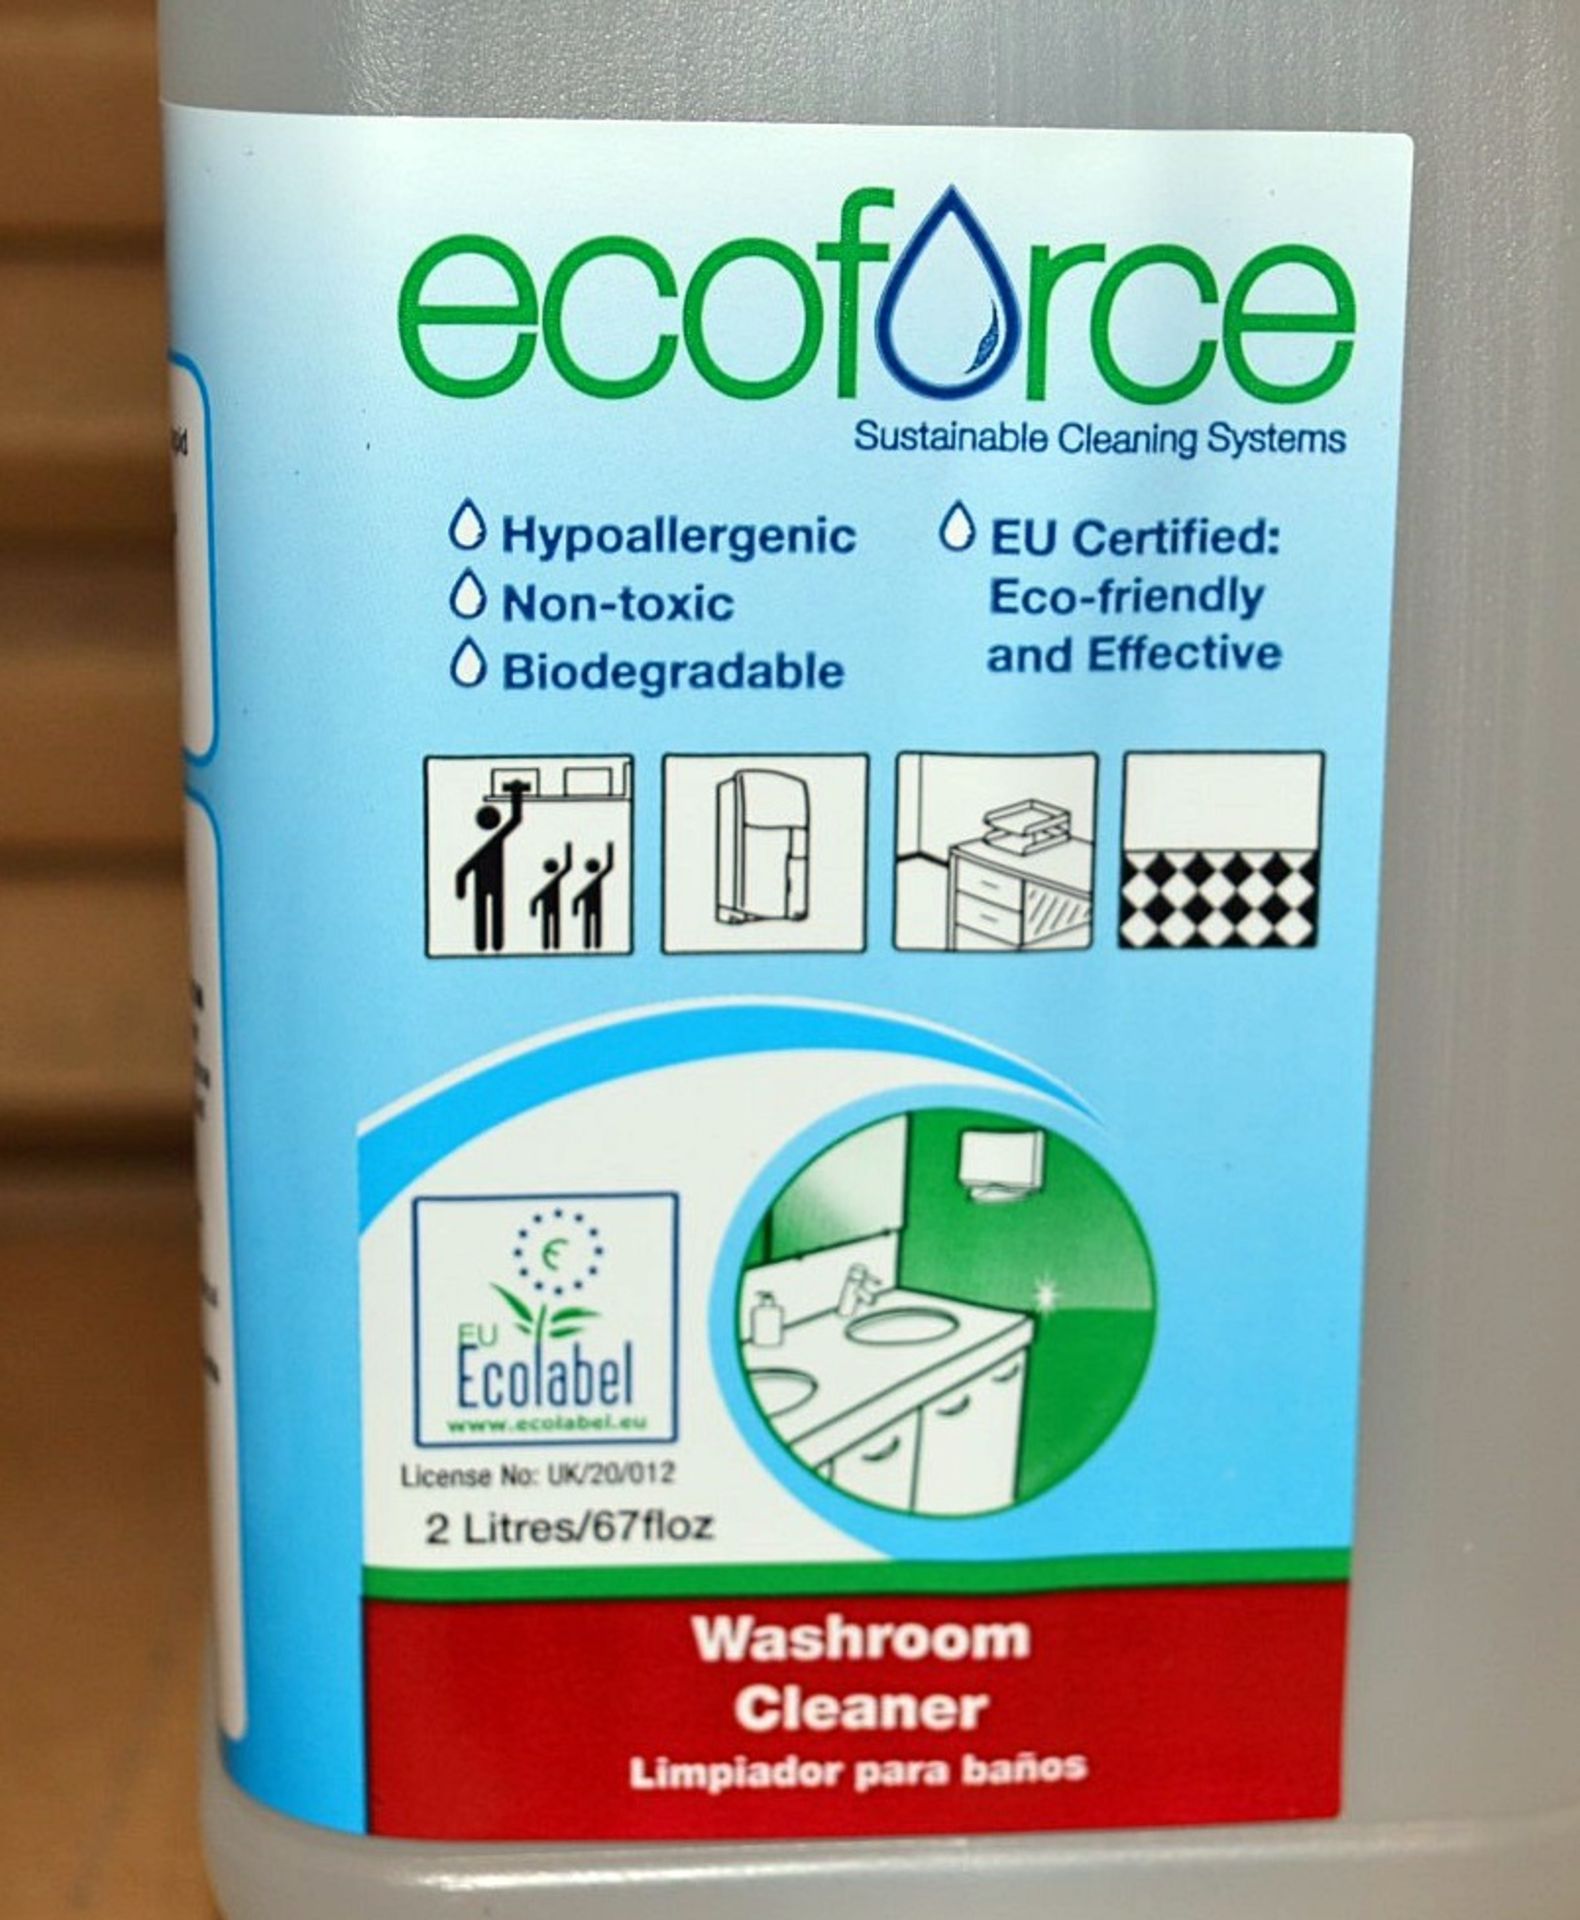 4 x 2 Litre Ecoforce Concentrated Washroom Cleaner - New & Boxed Stock - CL083 - Ref: 11605 - - Image 5 of 8